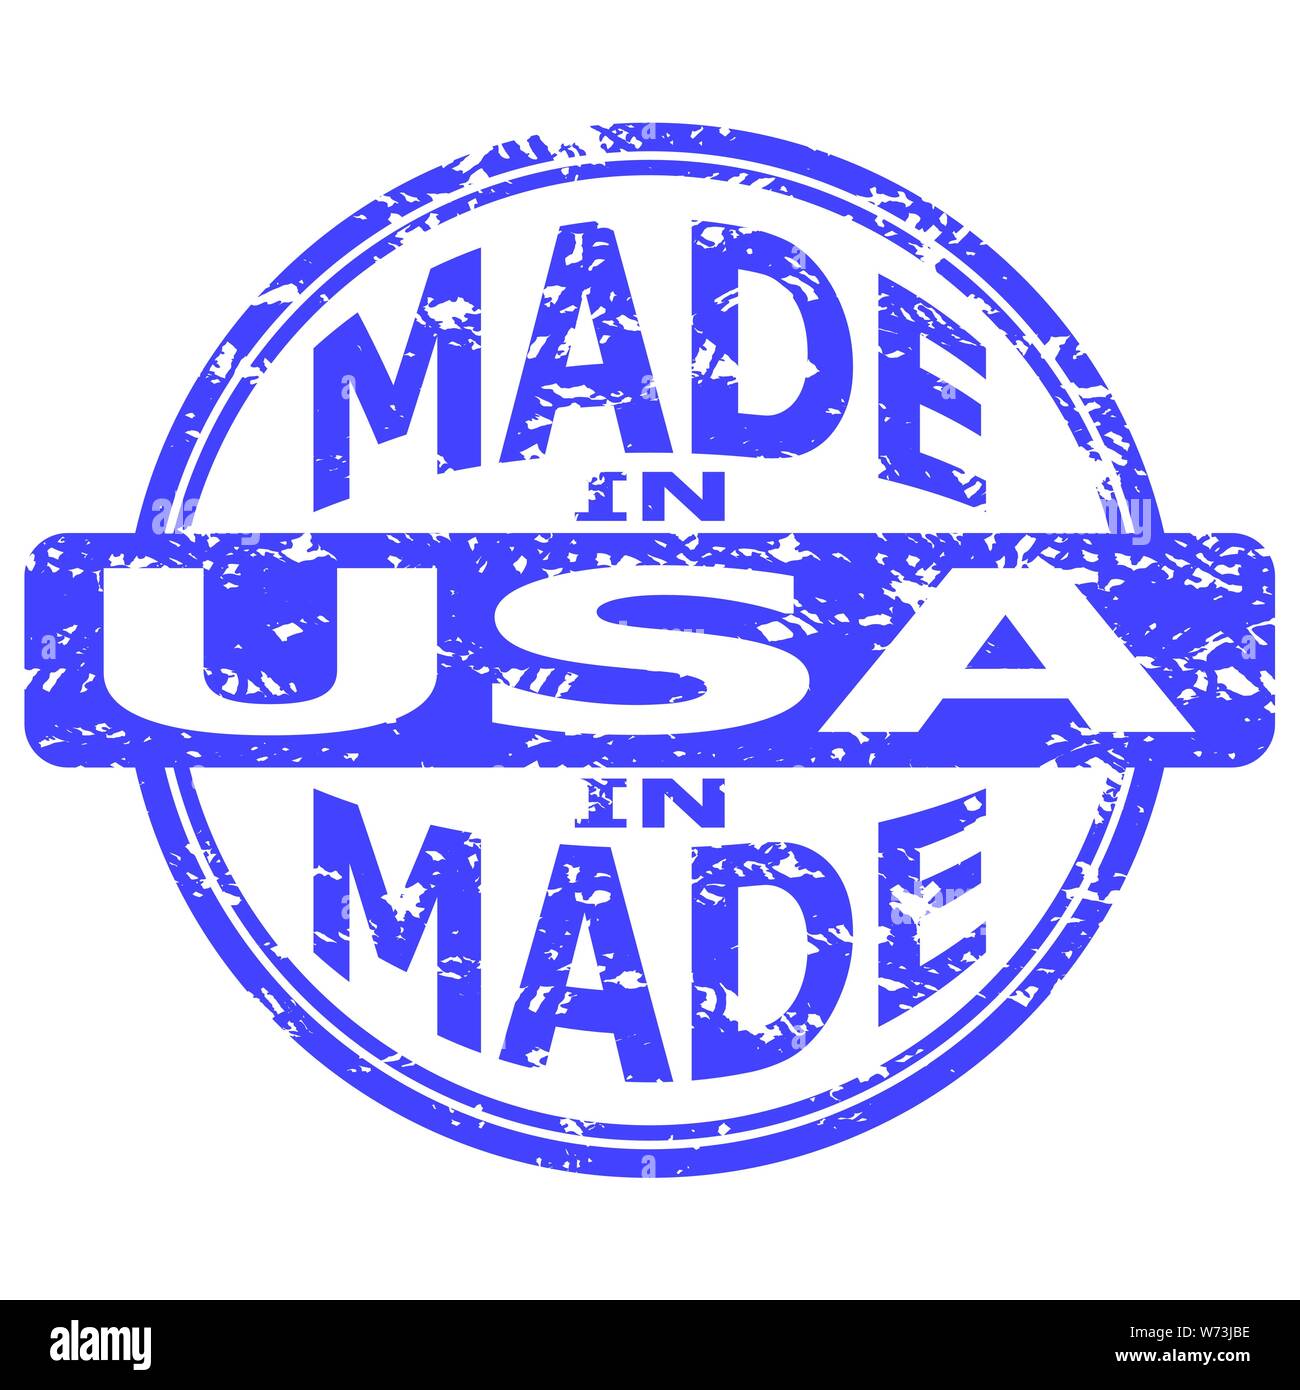 Fabricated in united states of america. Vector made in USA, produce from american region, manufactured retail seal, grunge origin usa illustration Stock Vector